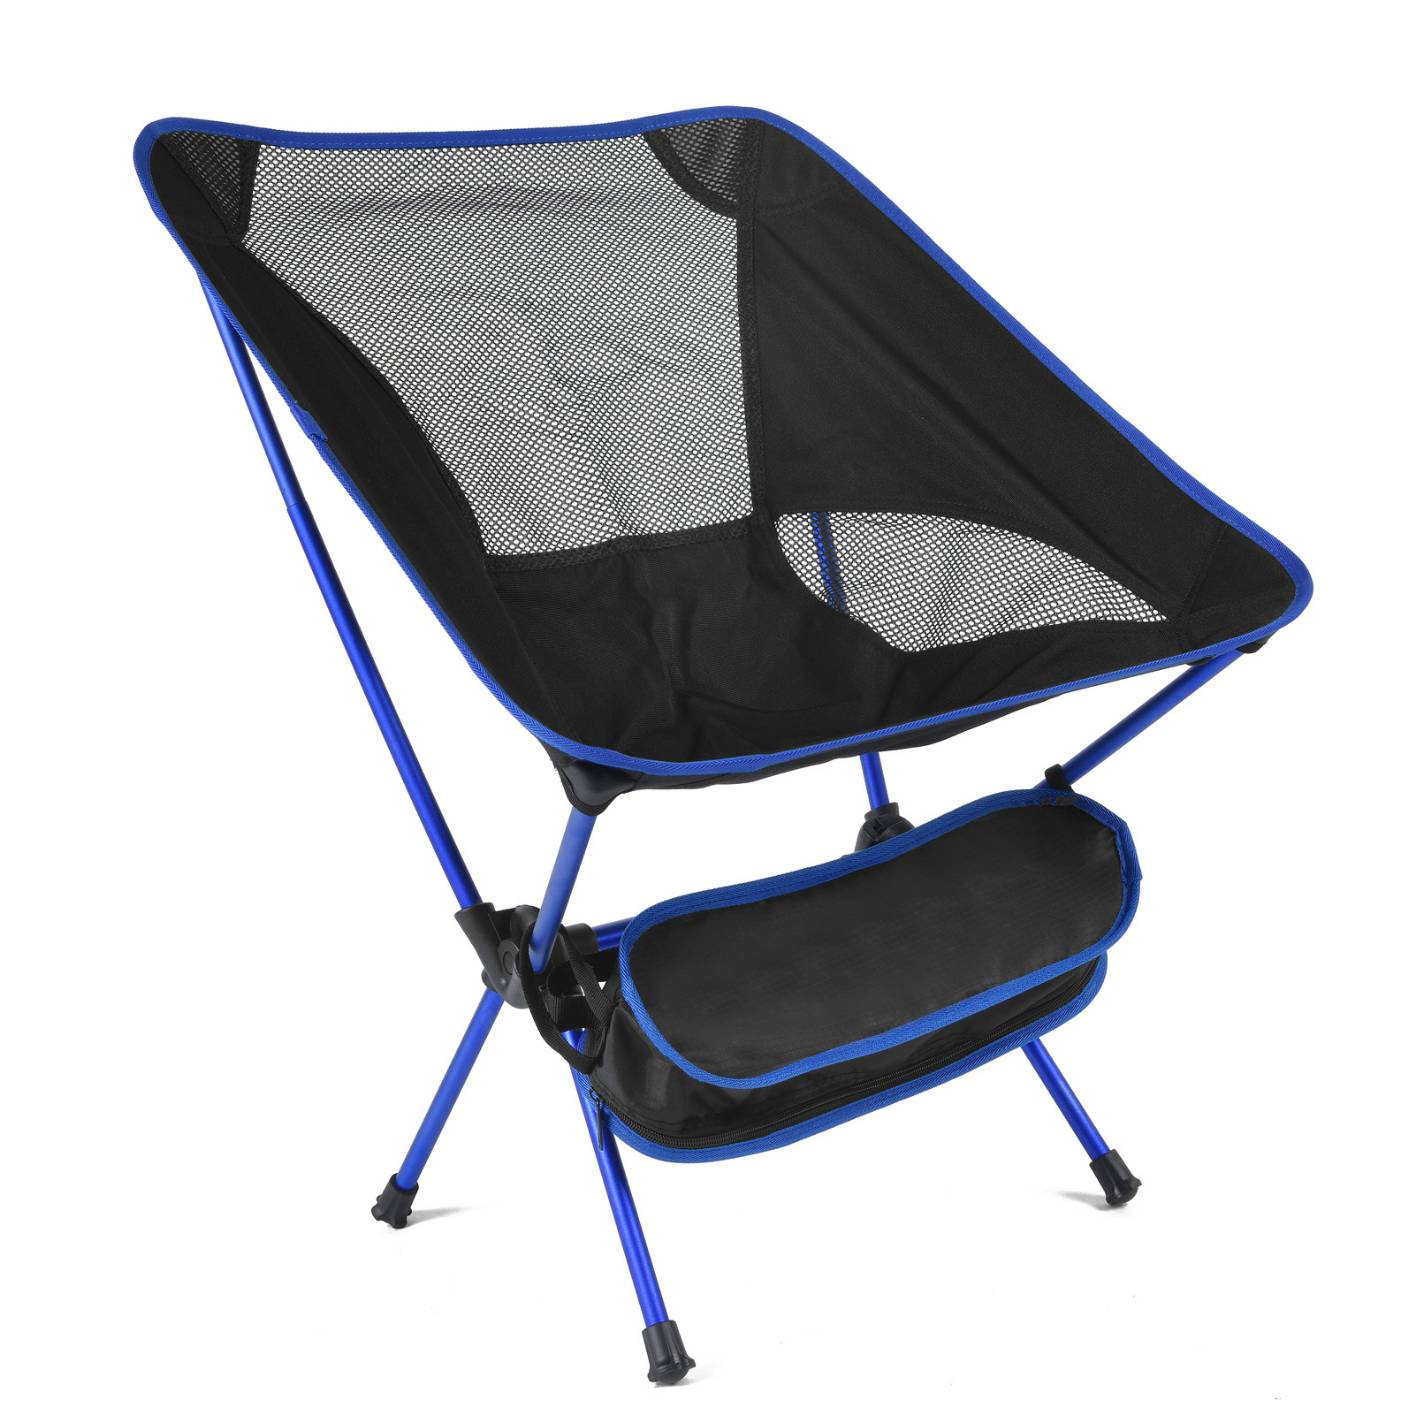 D11 Detachable Portable Folding Moon Chair Outdoor Camping Chairs Beach Fishing Chair Ultralight Travel Hiking Picnic Seat Tools